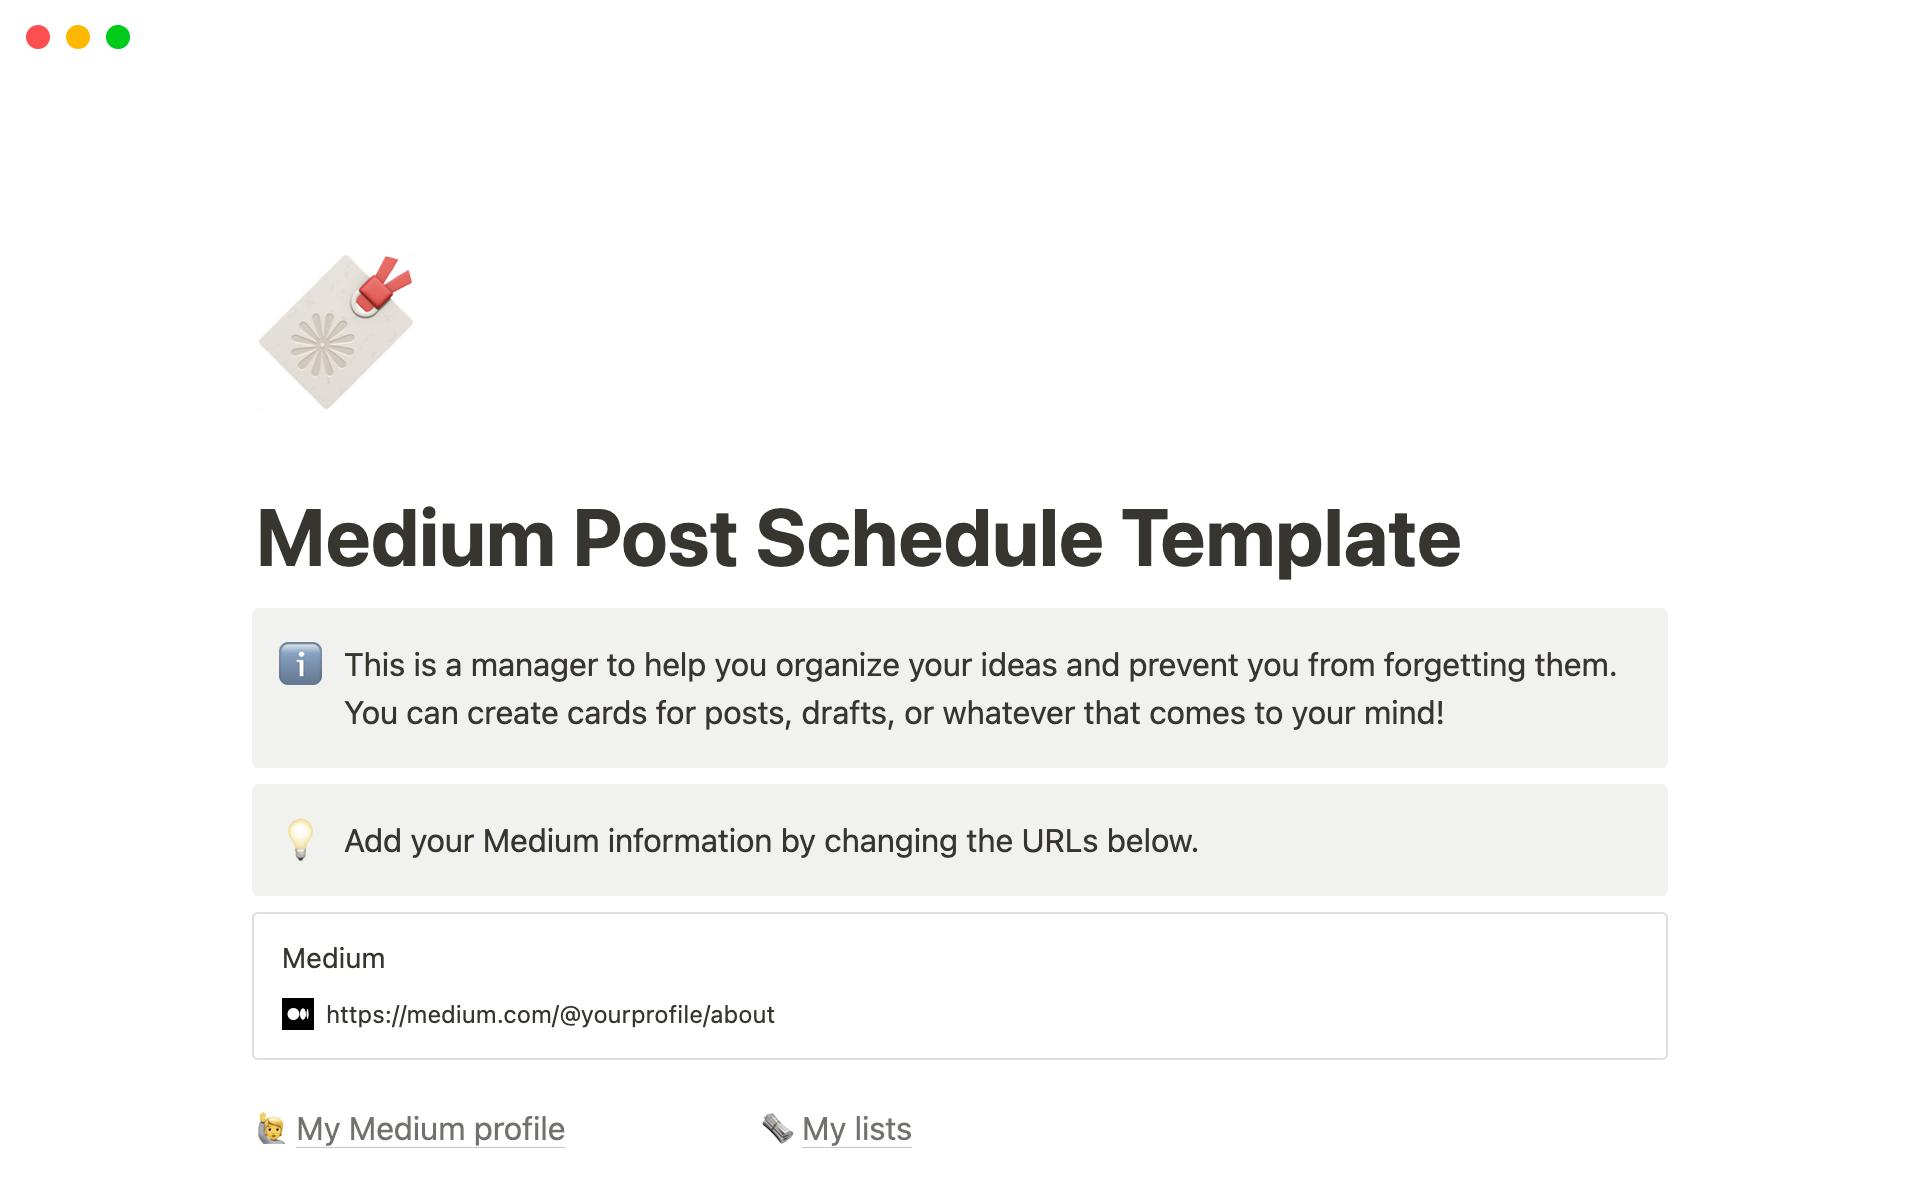 It helps people track their post and post ideas in Medium